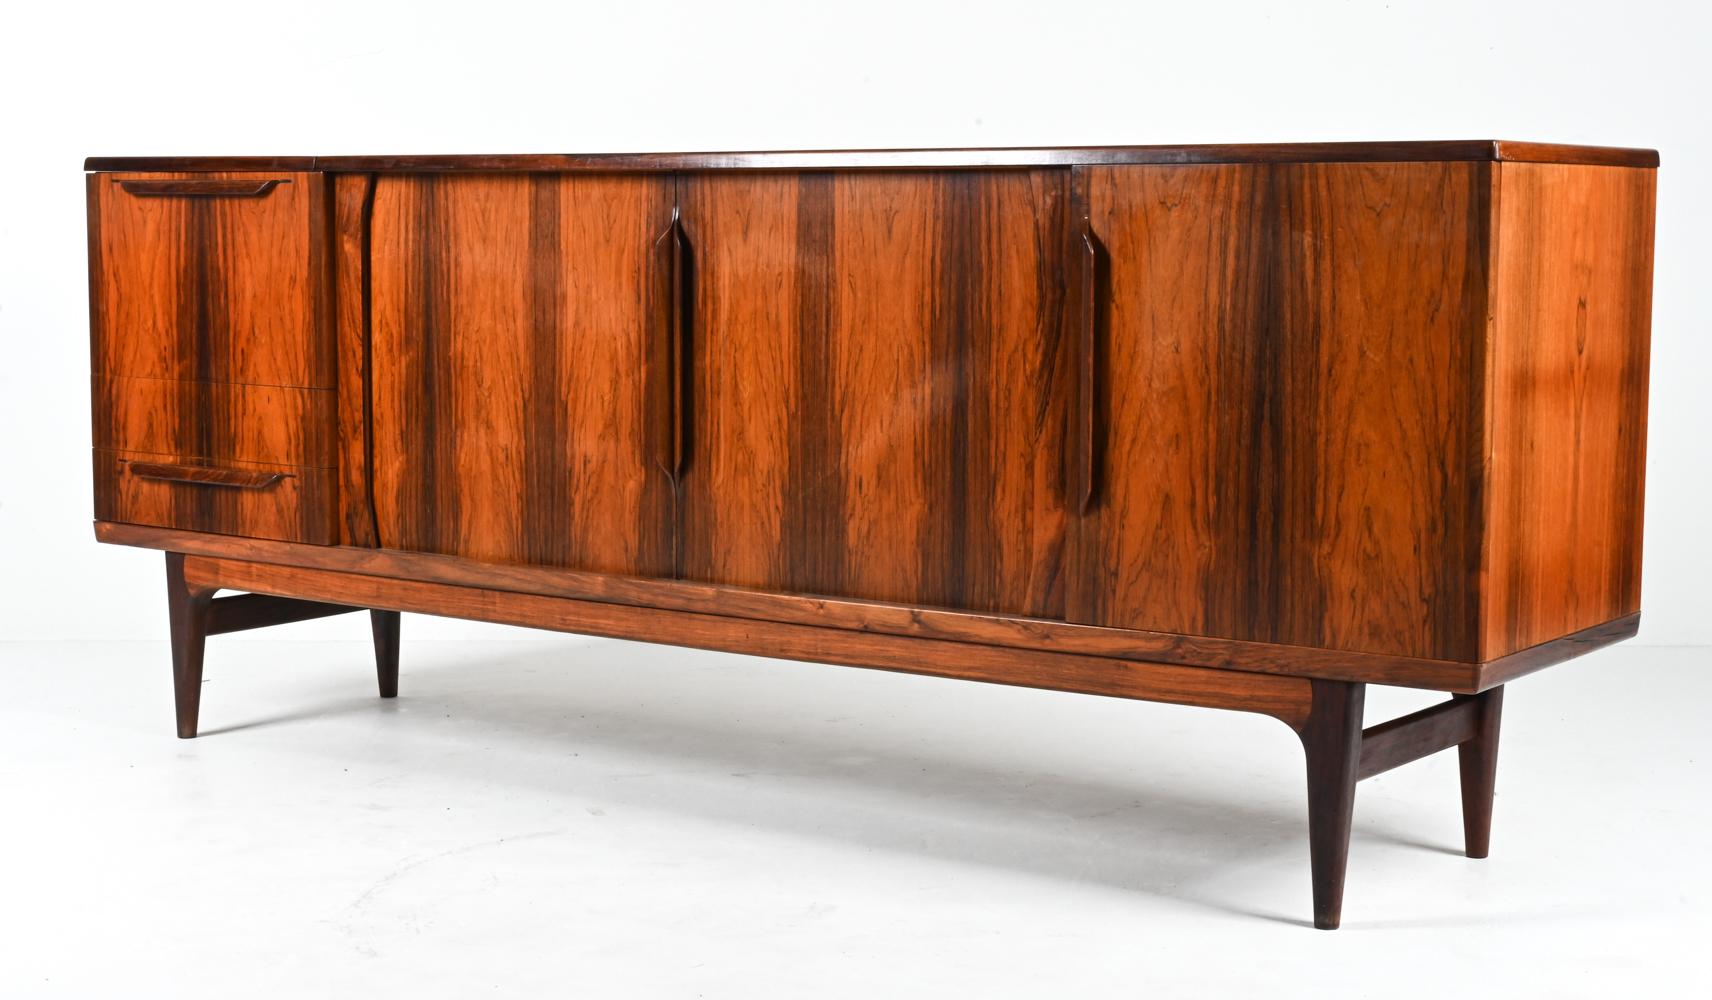 Designed by the inimitable Johannes Andersen, this exceptional Danish Mid-Century sideboard features not only luxurious bookmatched rosewood veneers, but also a rare configuration that's full of surprises and features. 

The central tambour doors